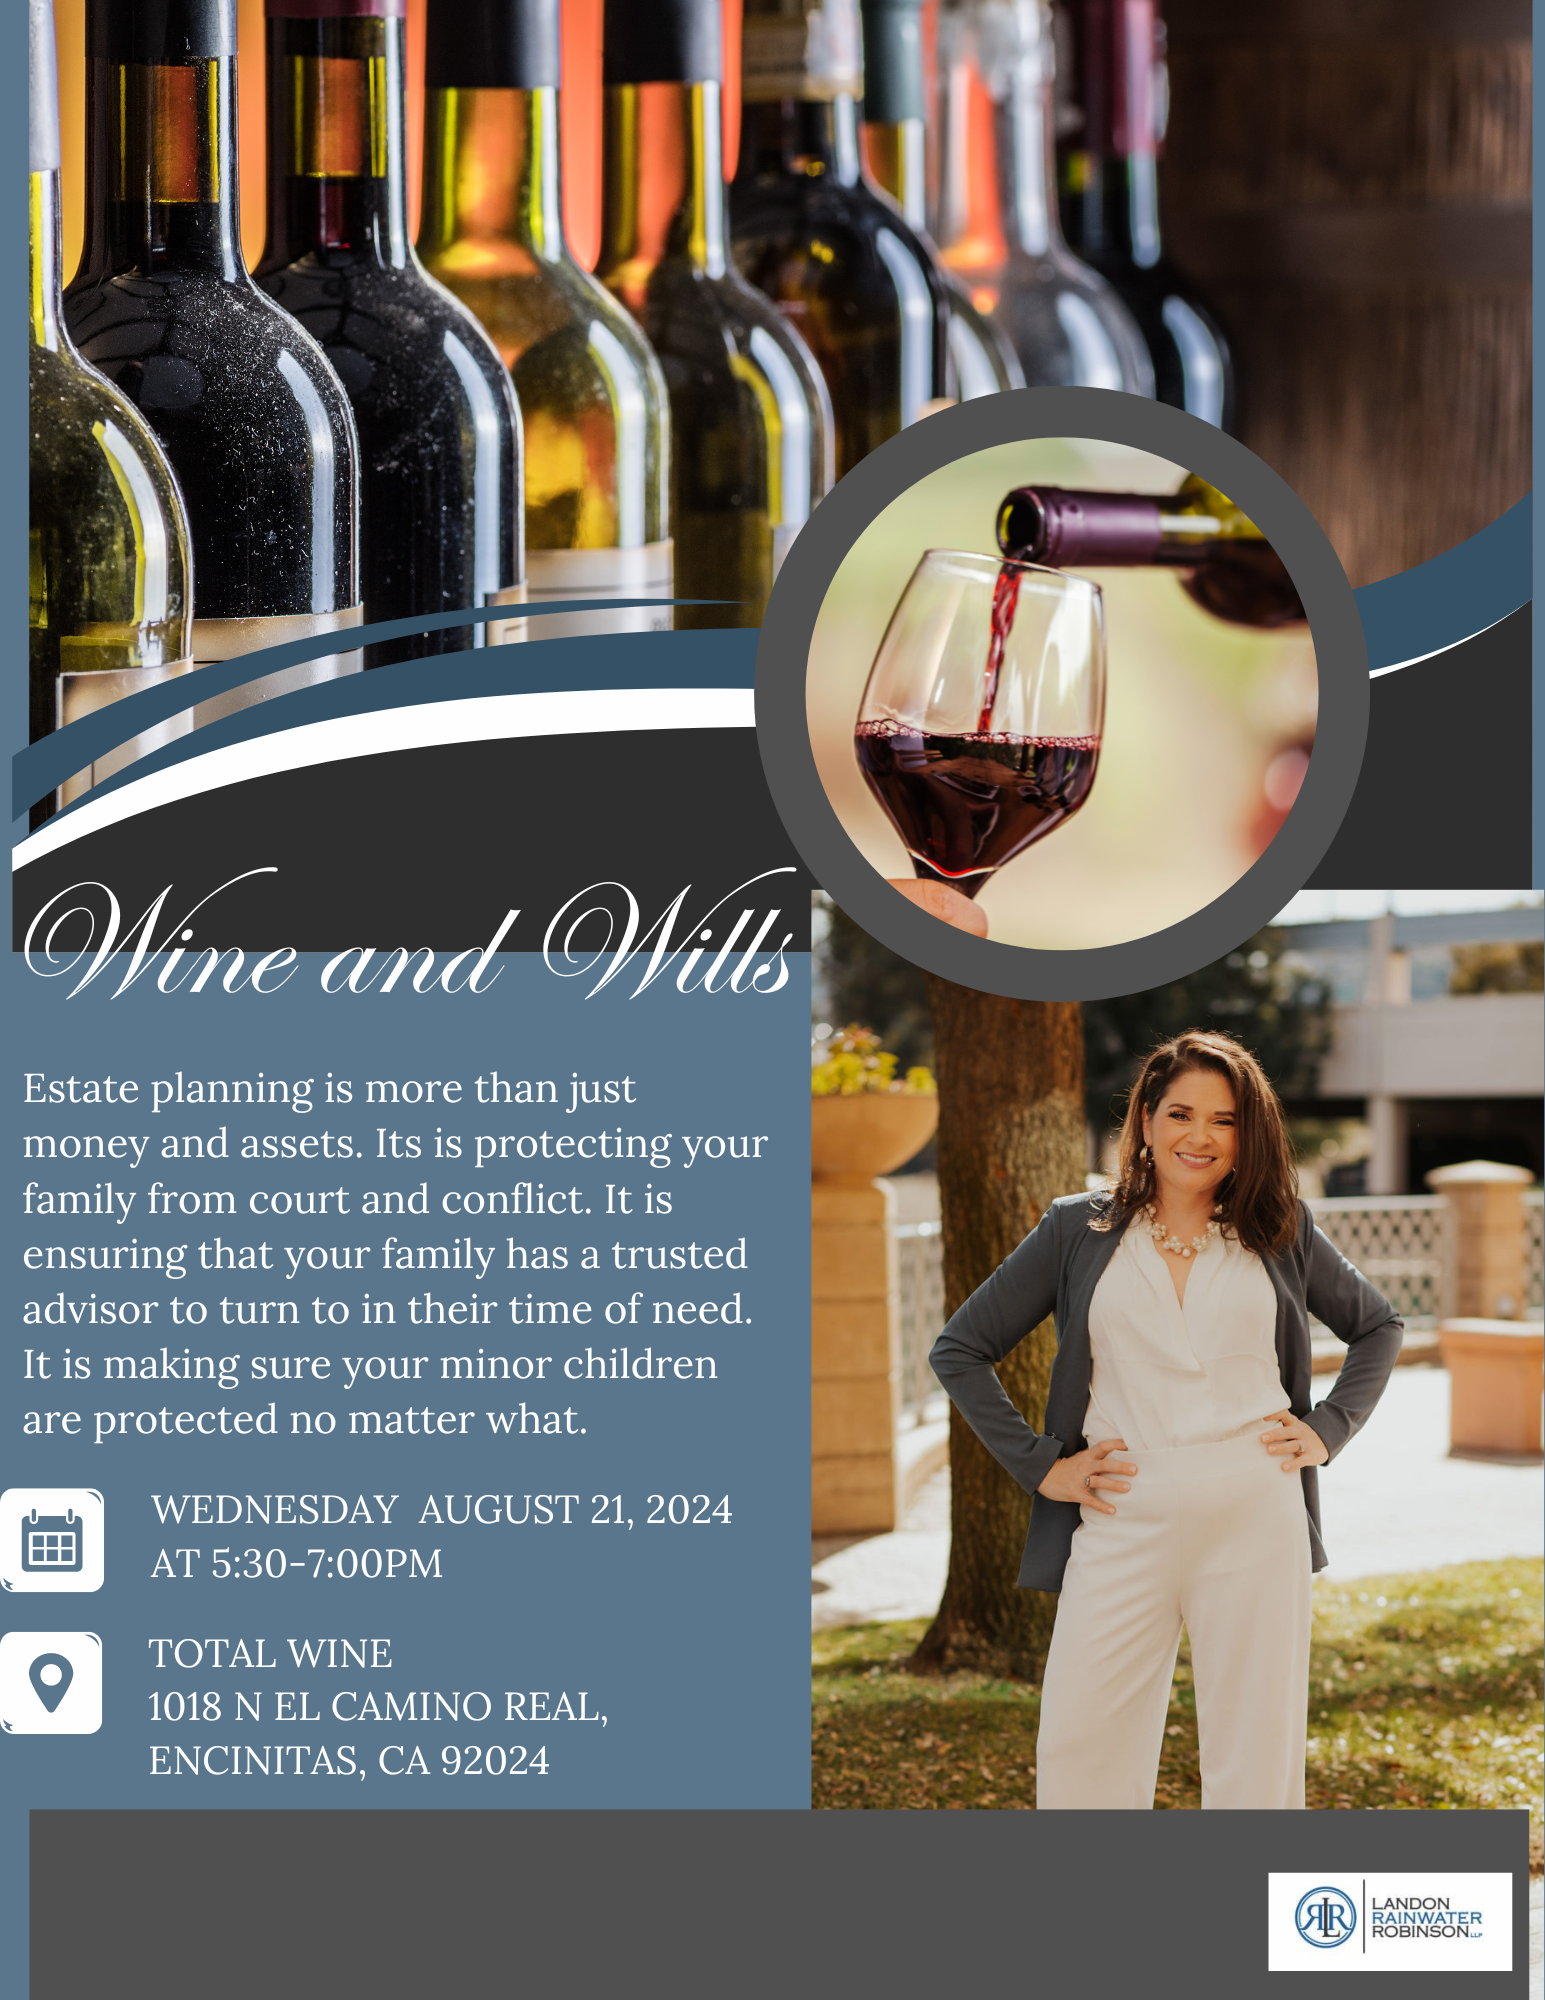 Wine and Wills event 821(1)